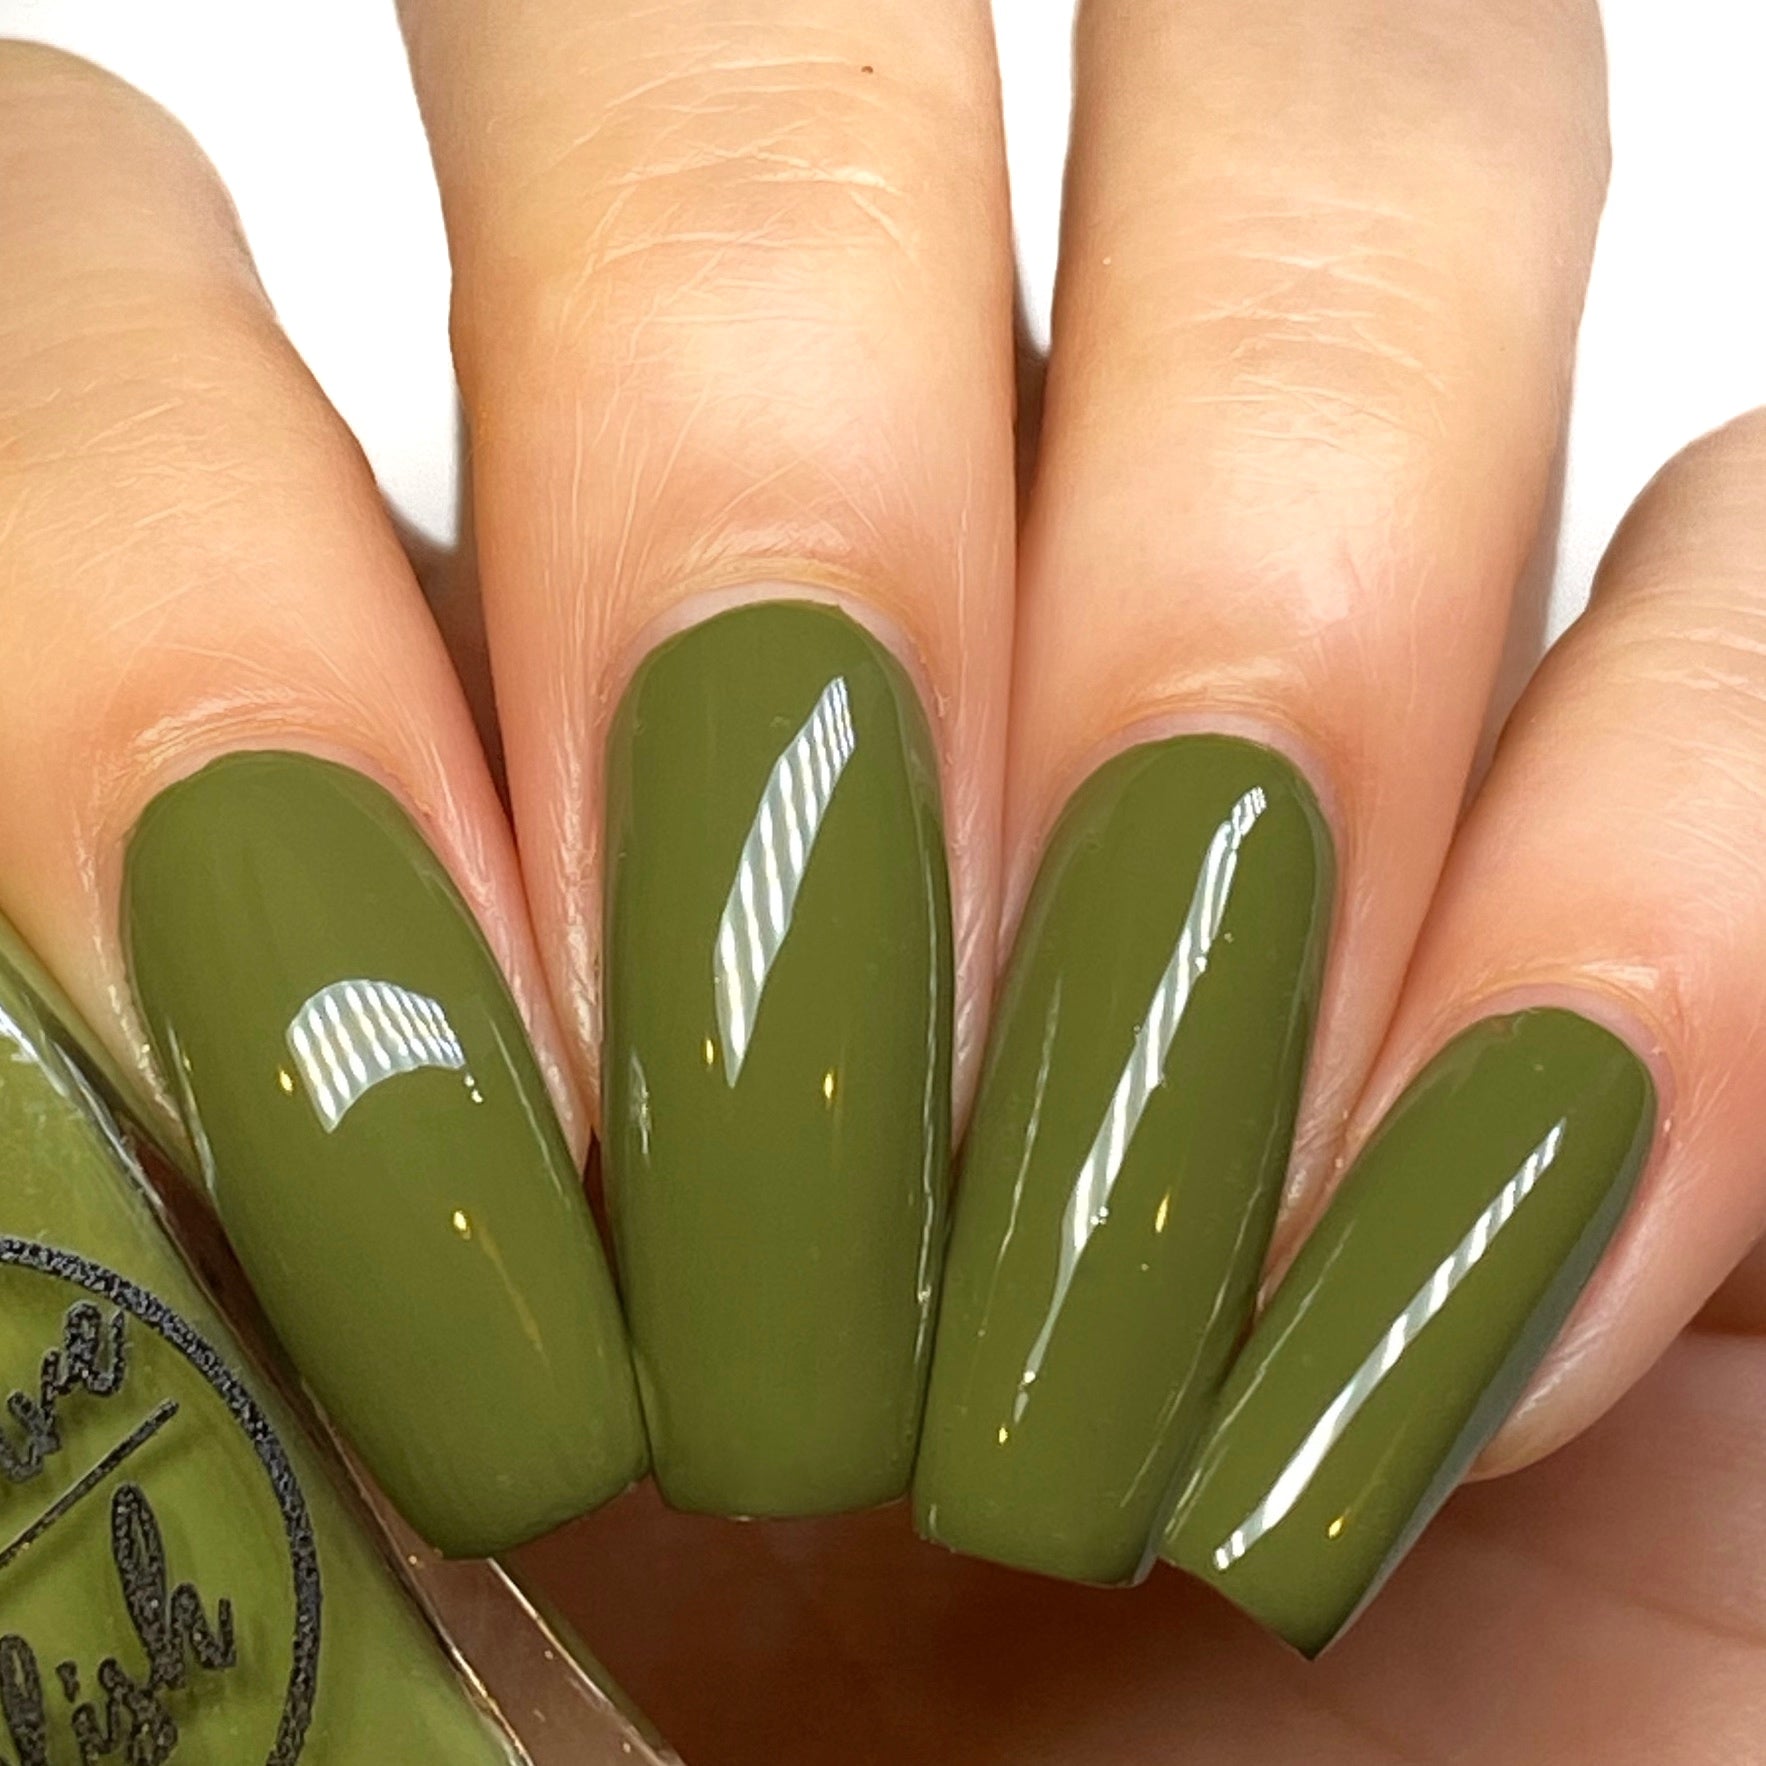 Get Your Green On for St. Paddy's Day | All Lacquered Up : All Lacquered Up